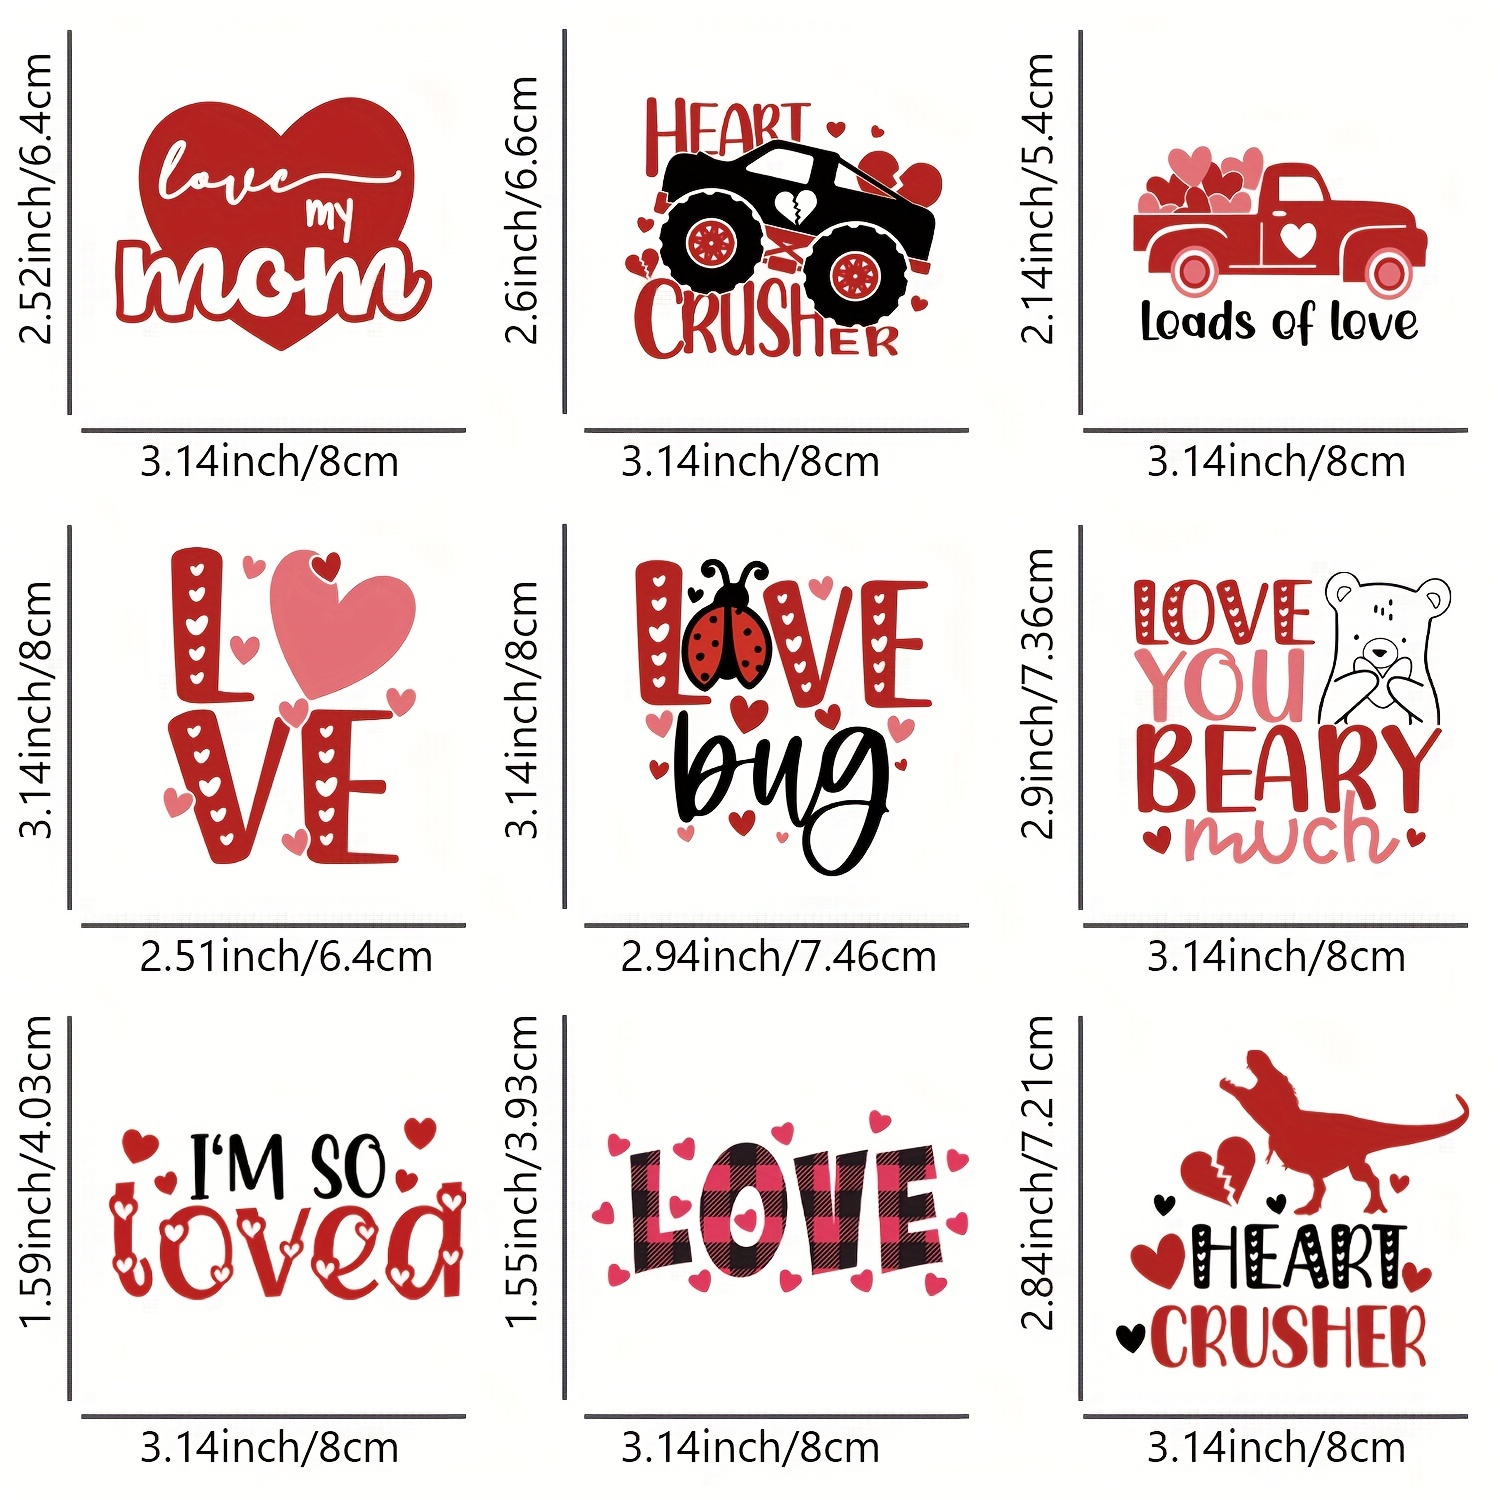  Valentines's Day Iron on Transfers Stickers, Iron on